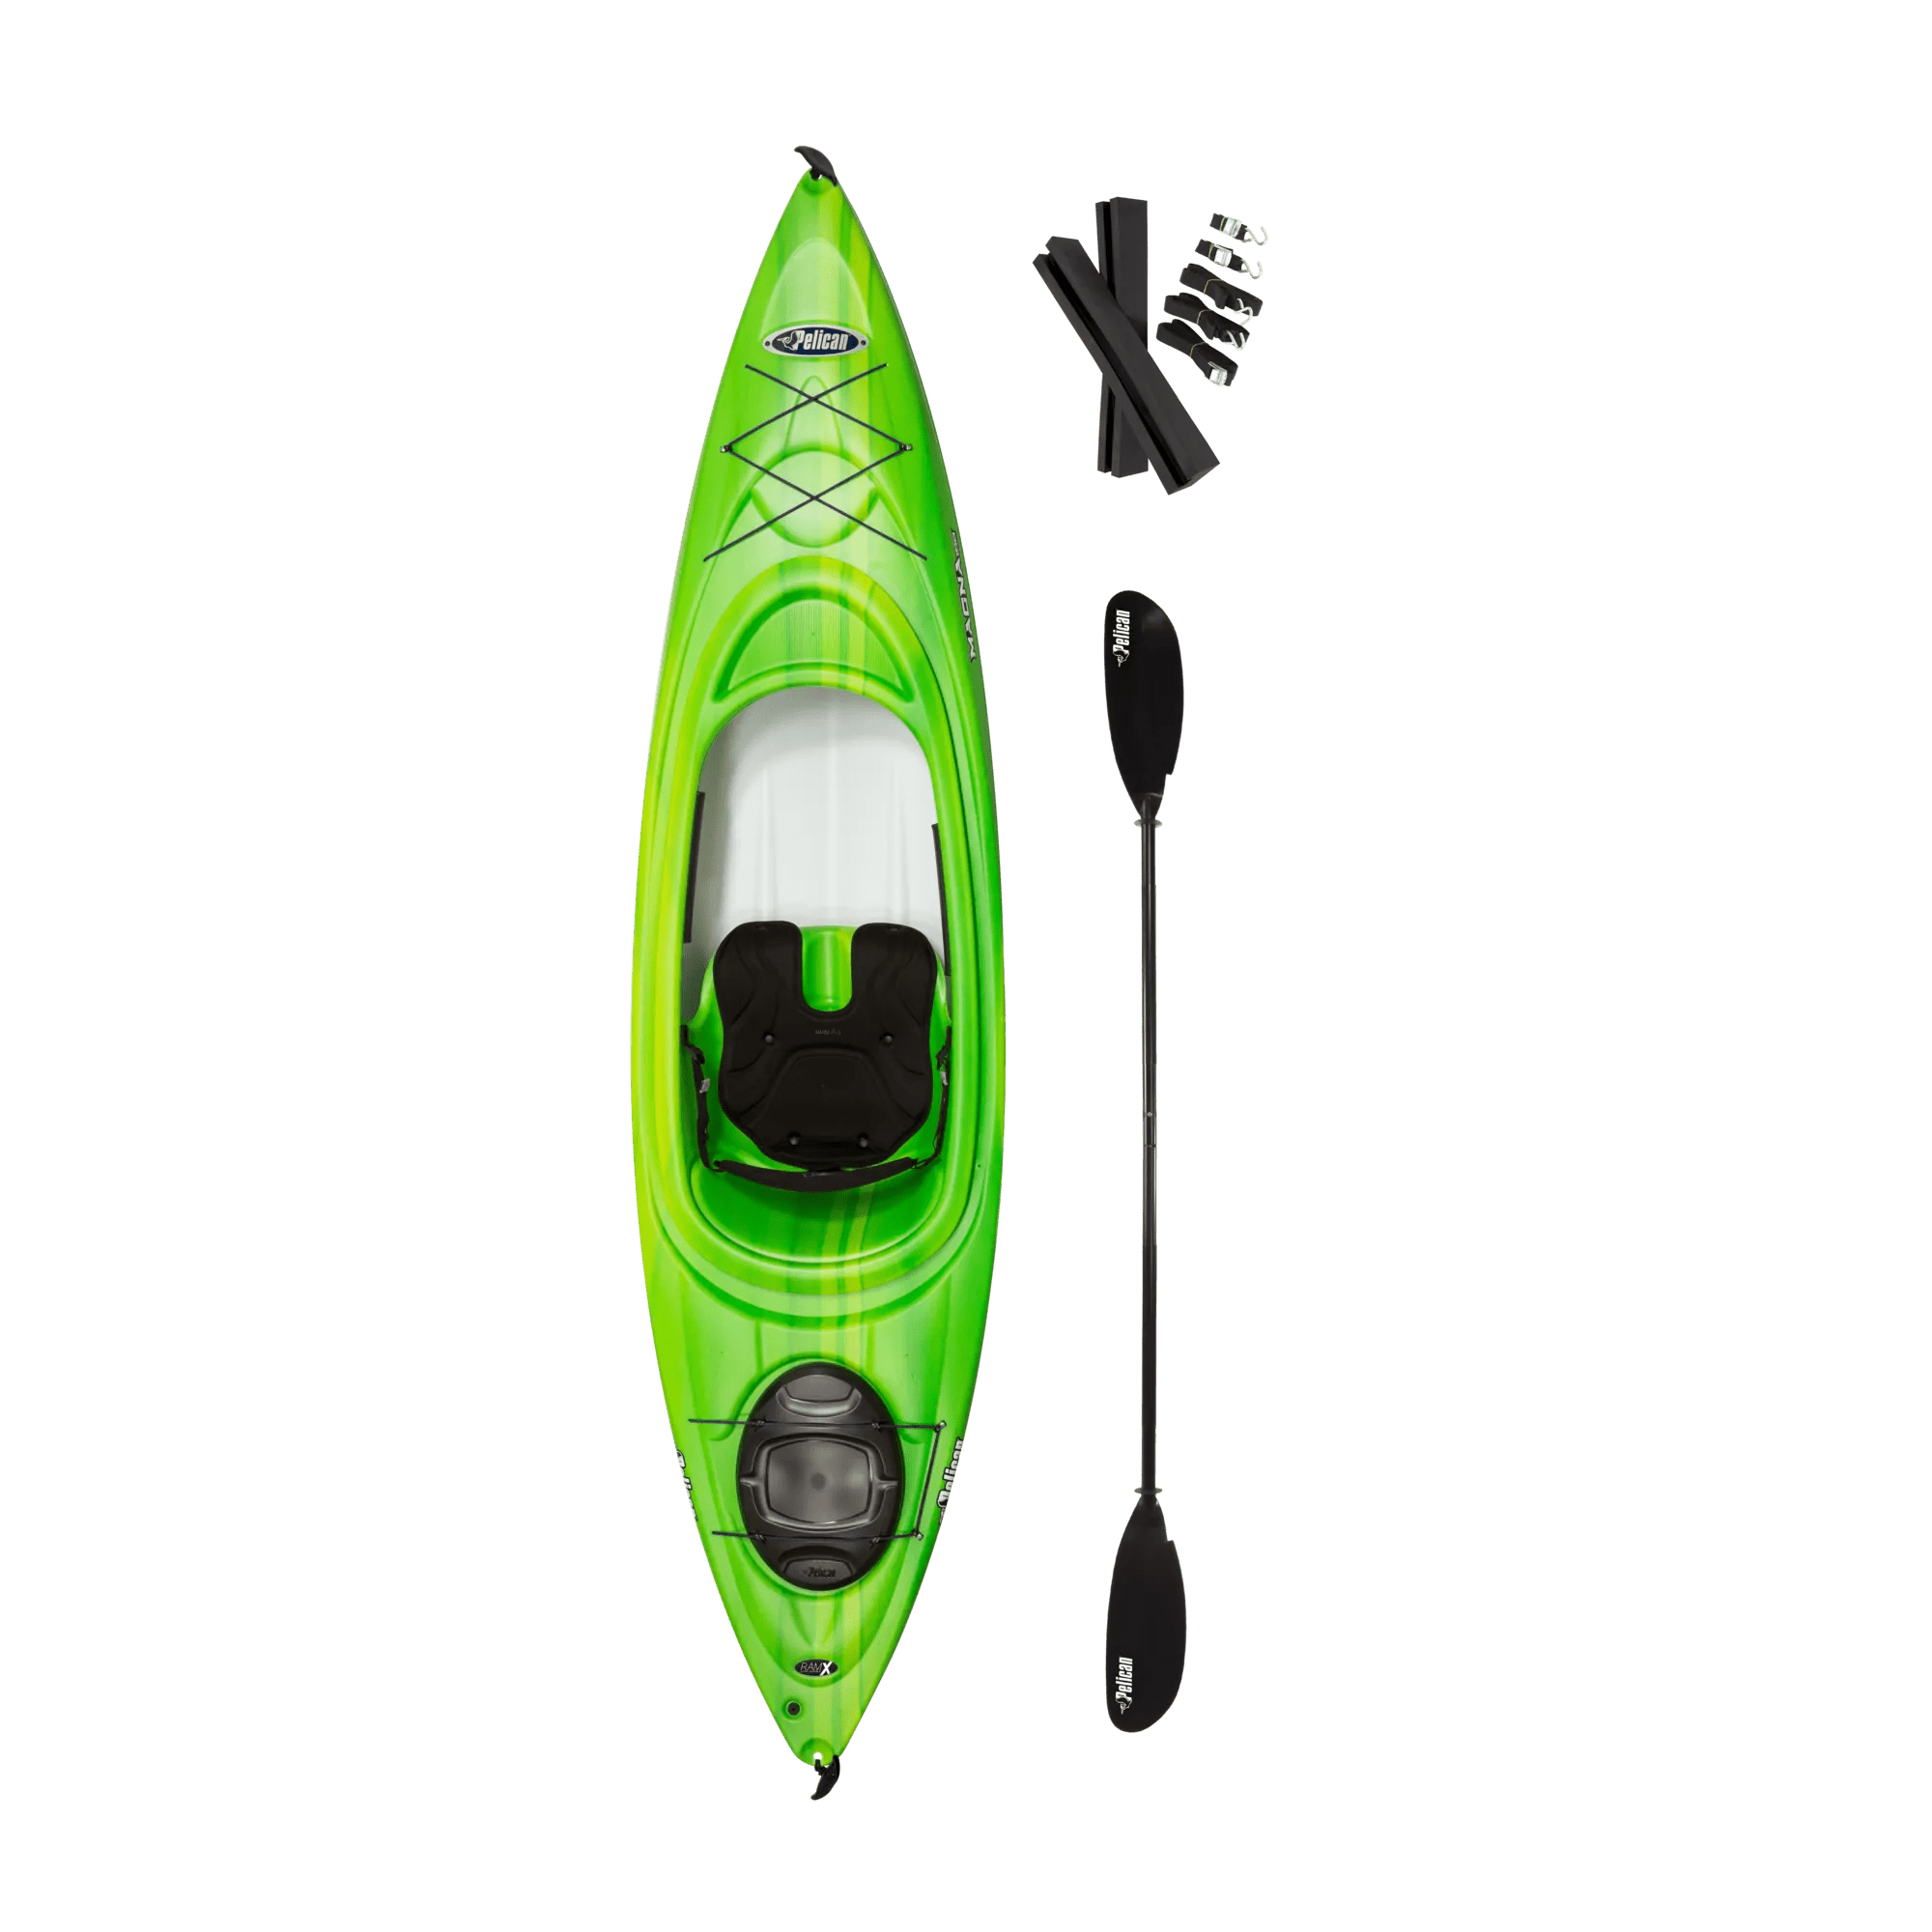 PELICAN - Magna 100 Kayak with Paddle - White - KXF10P208 - TOP